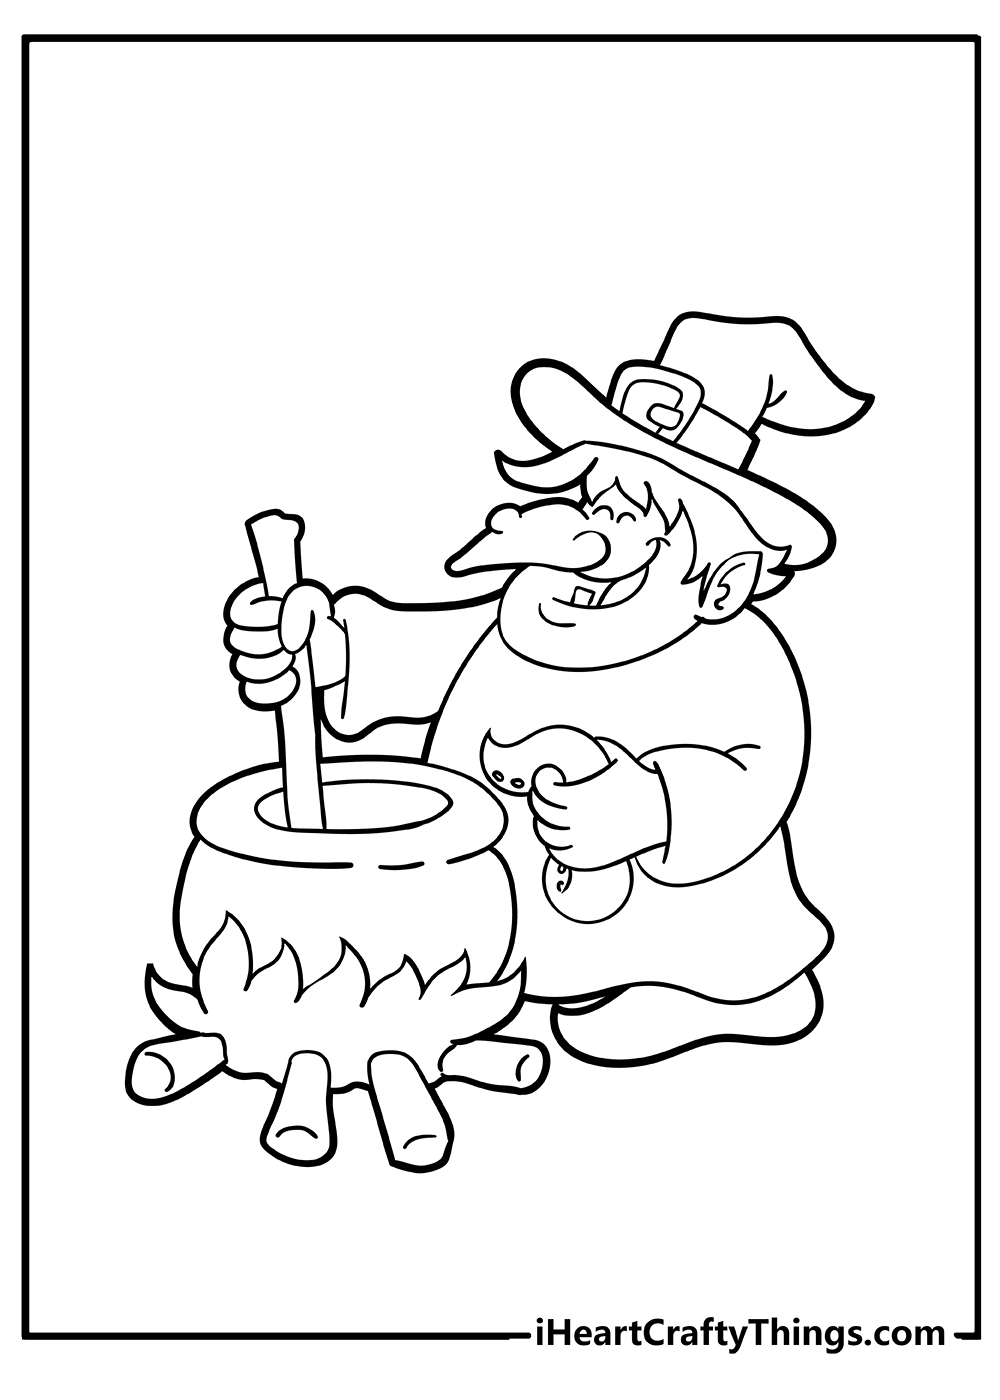 Witch Coloring Pages free pdf download